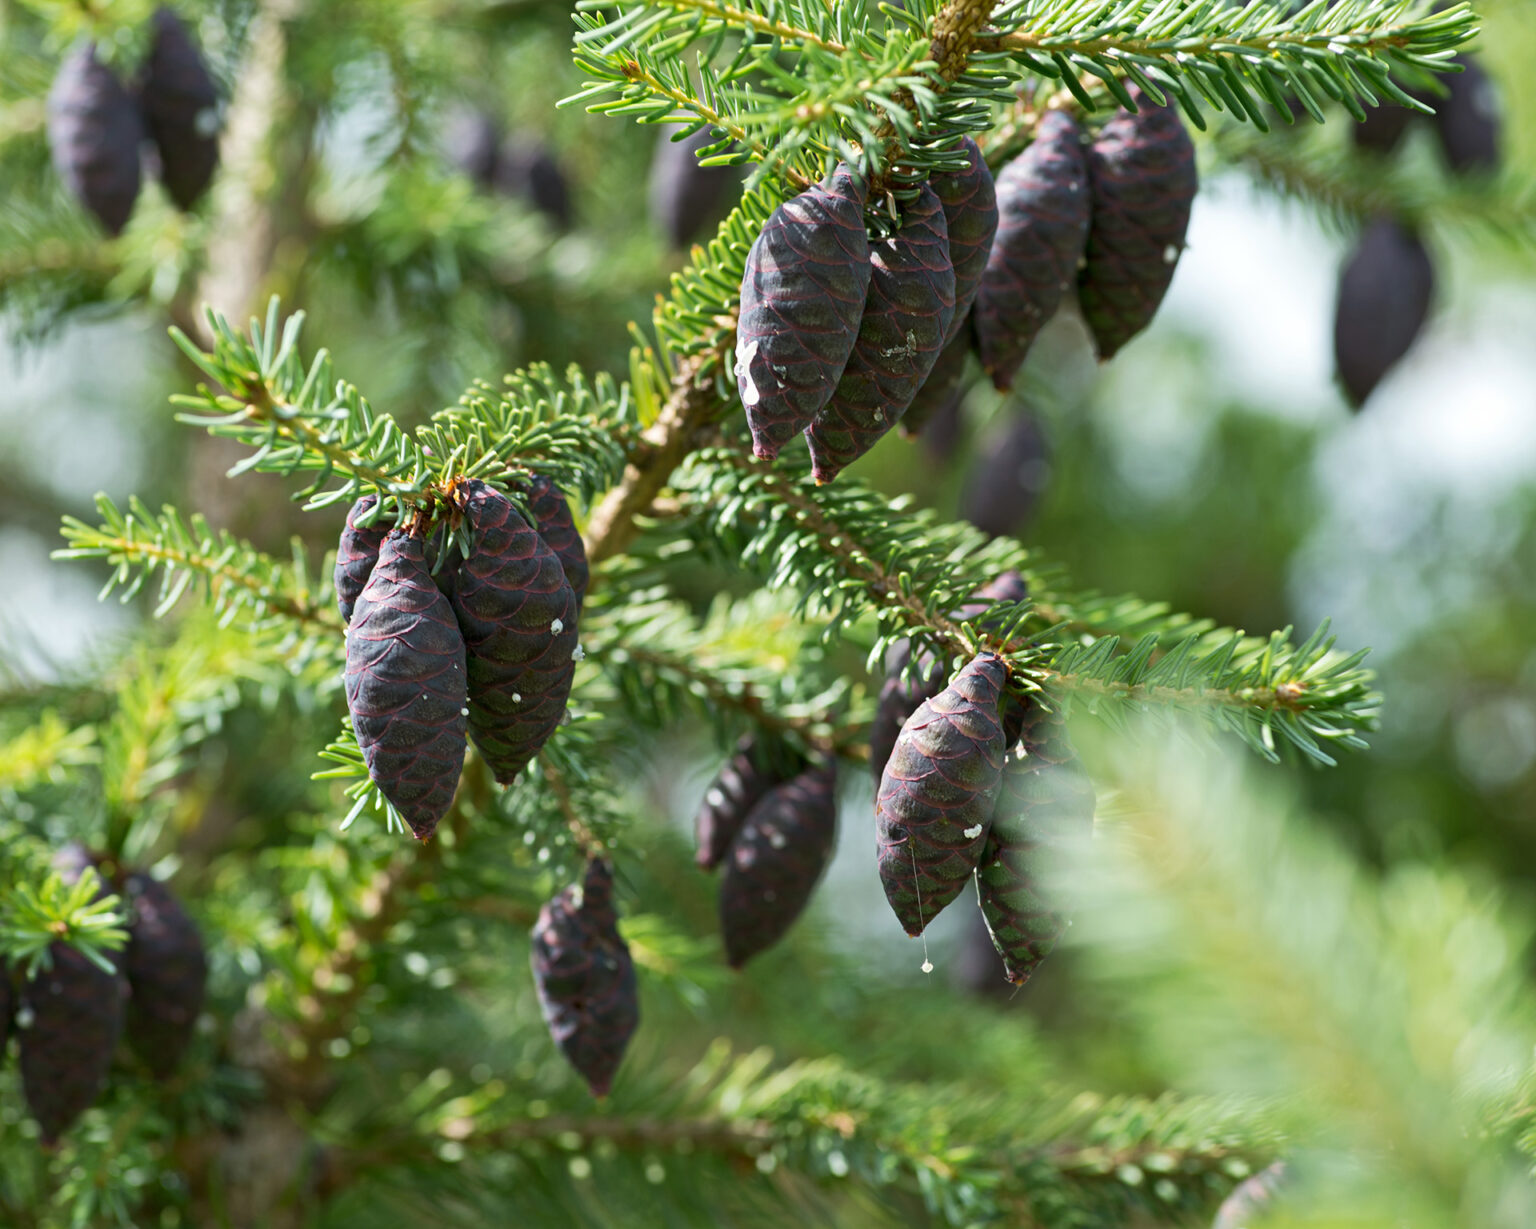 Pines cones hanging on a tree.